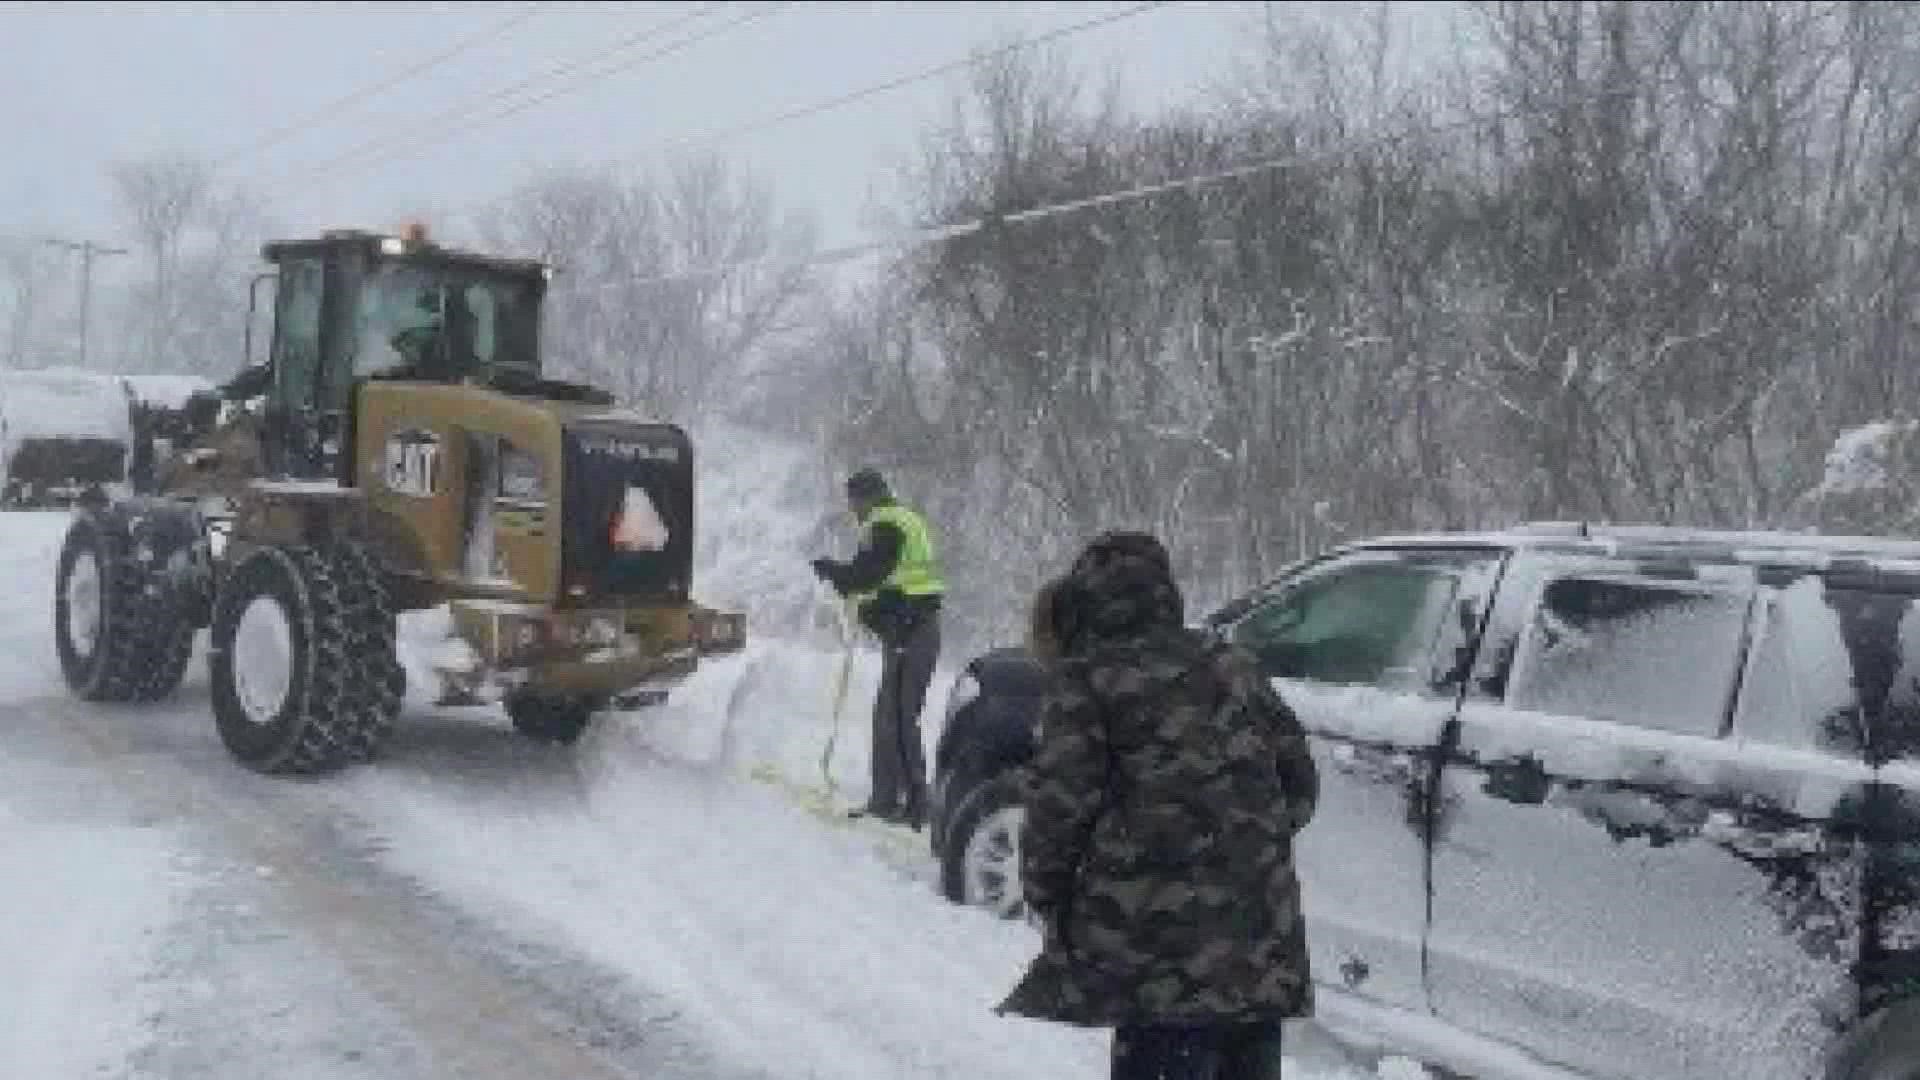 Winter storm continues to pummel Western New York